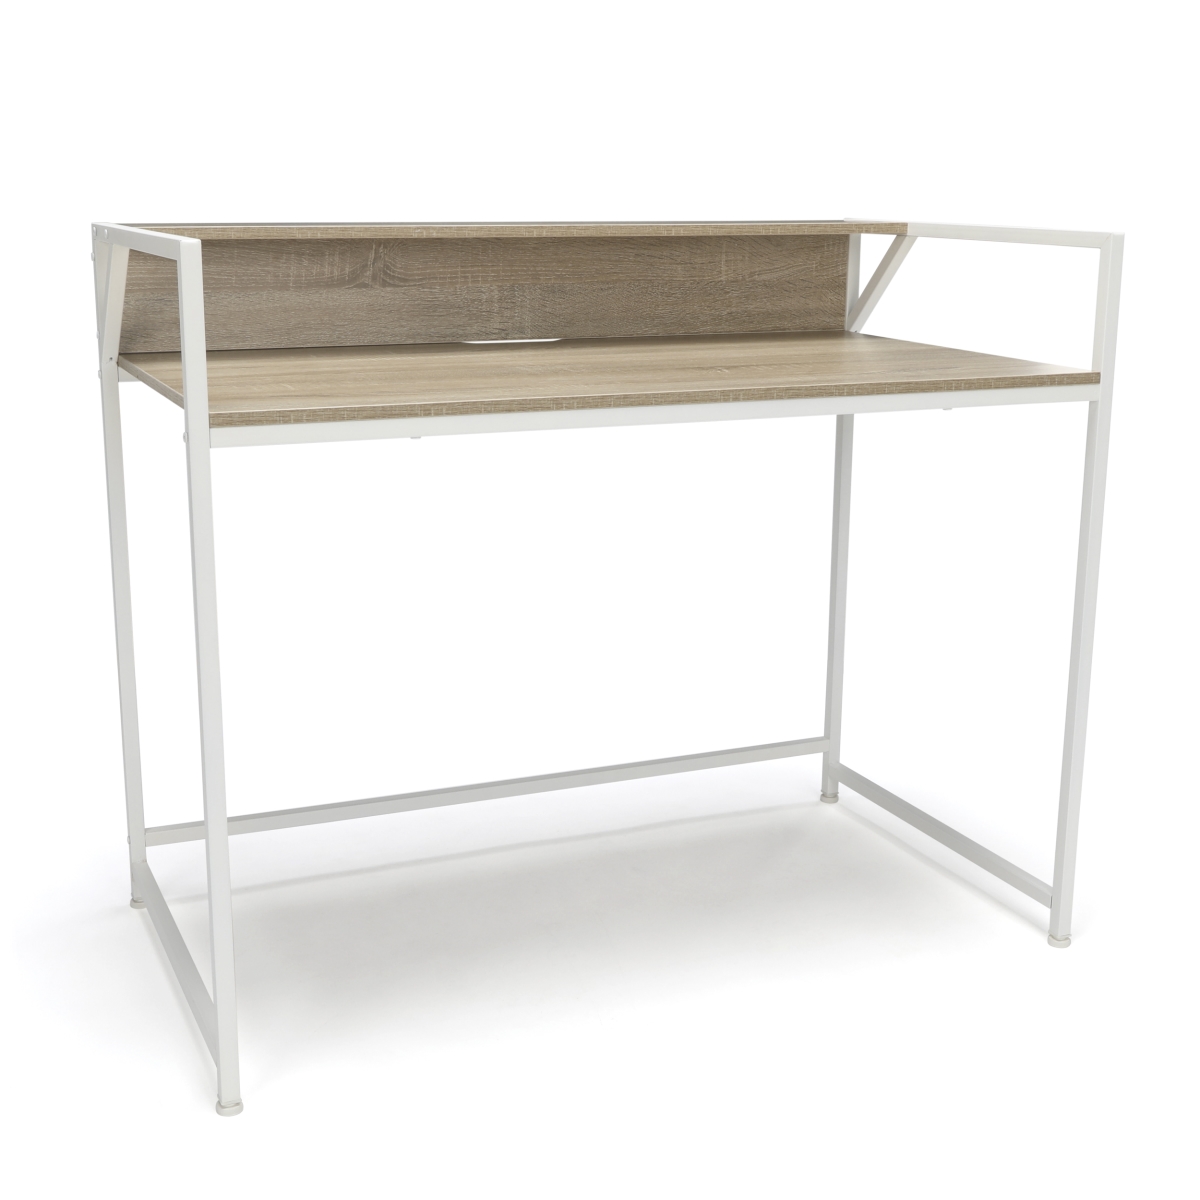 Ess-1003-wht-nat Computer Desk With Shelf, White With Natural